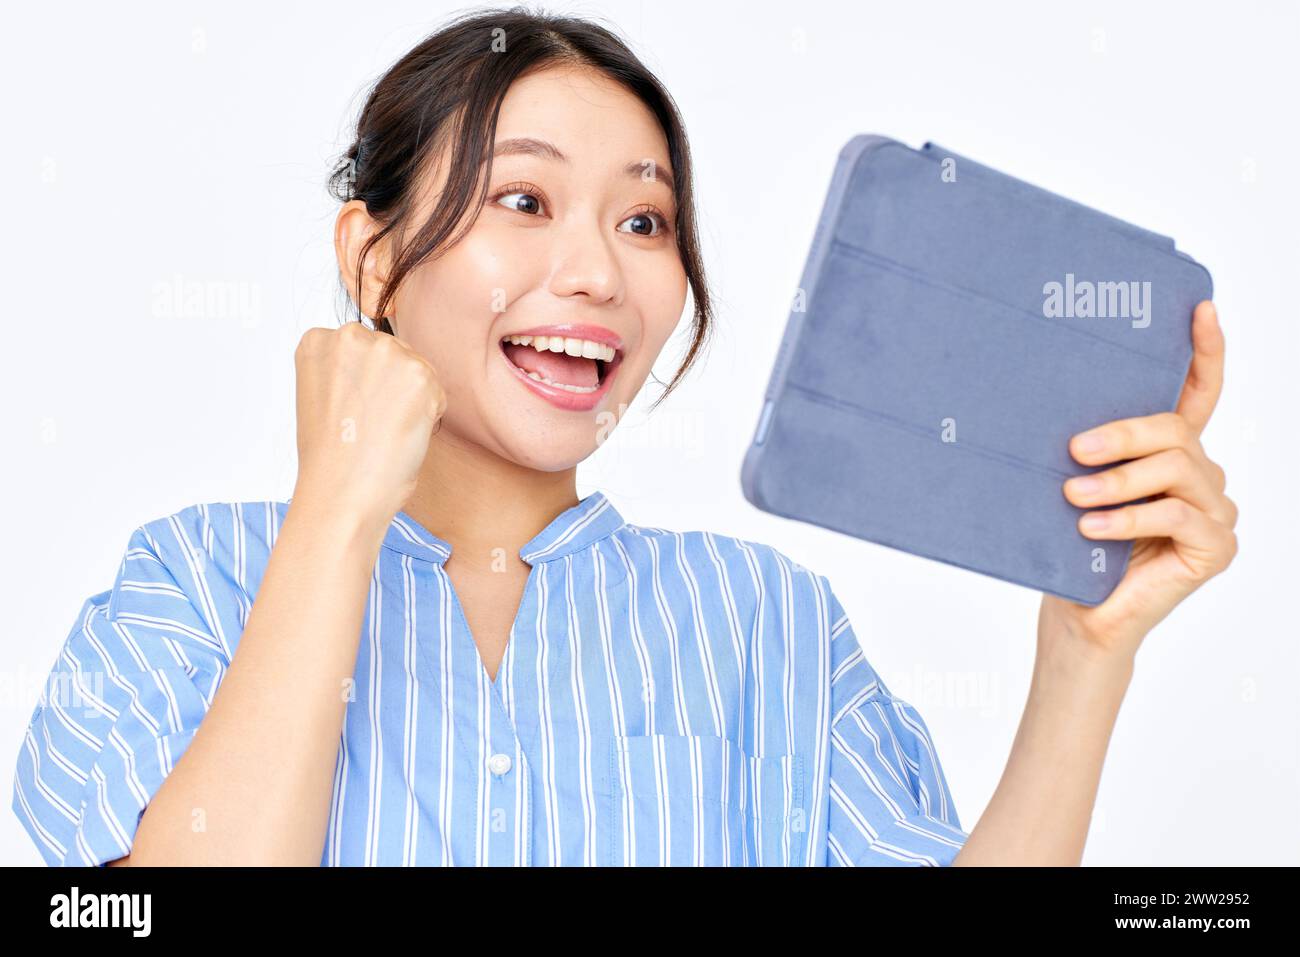 A woman holding a tablet computer and smiling Stock Photo